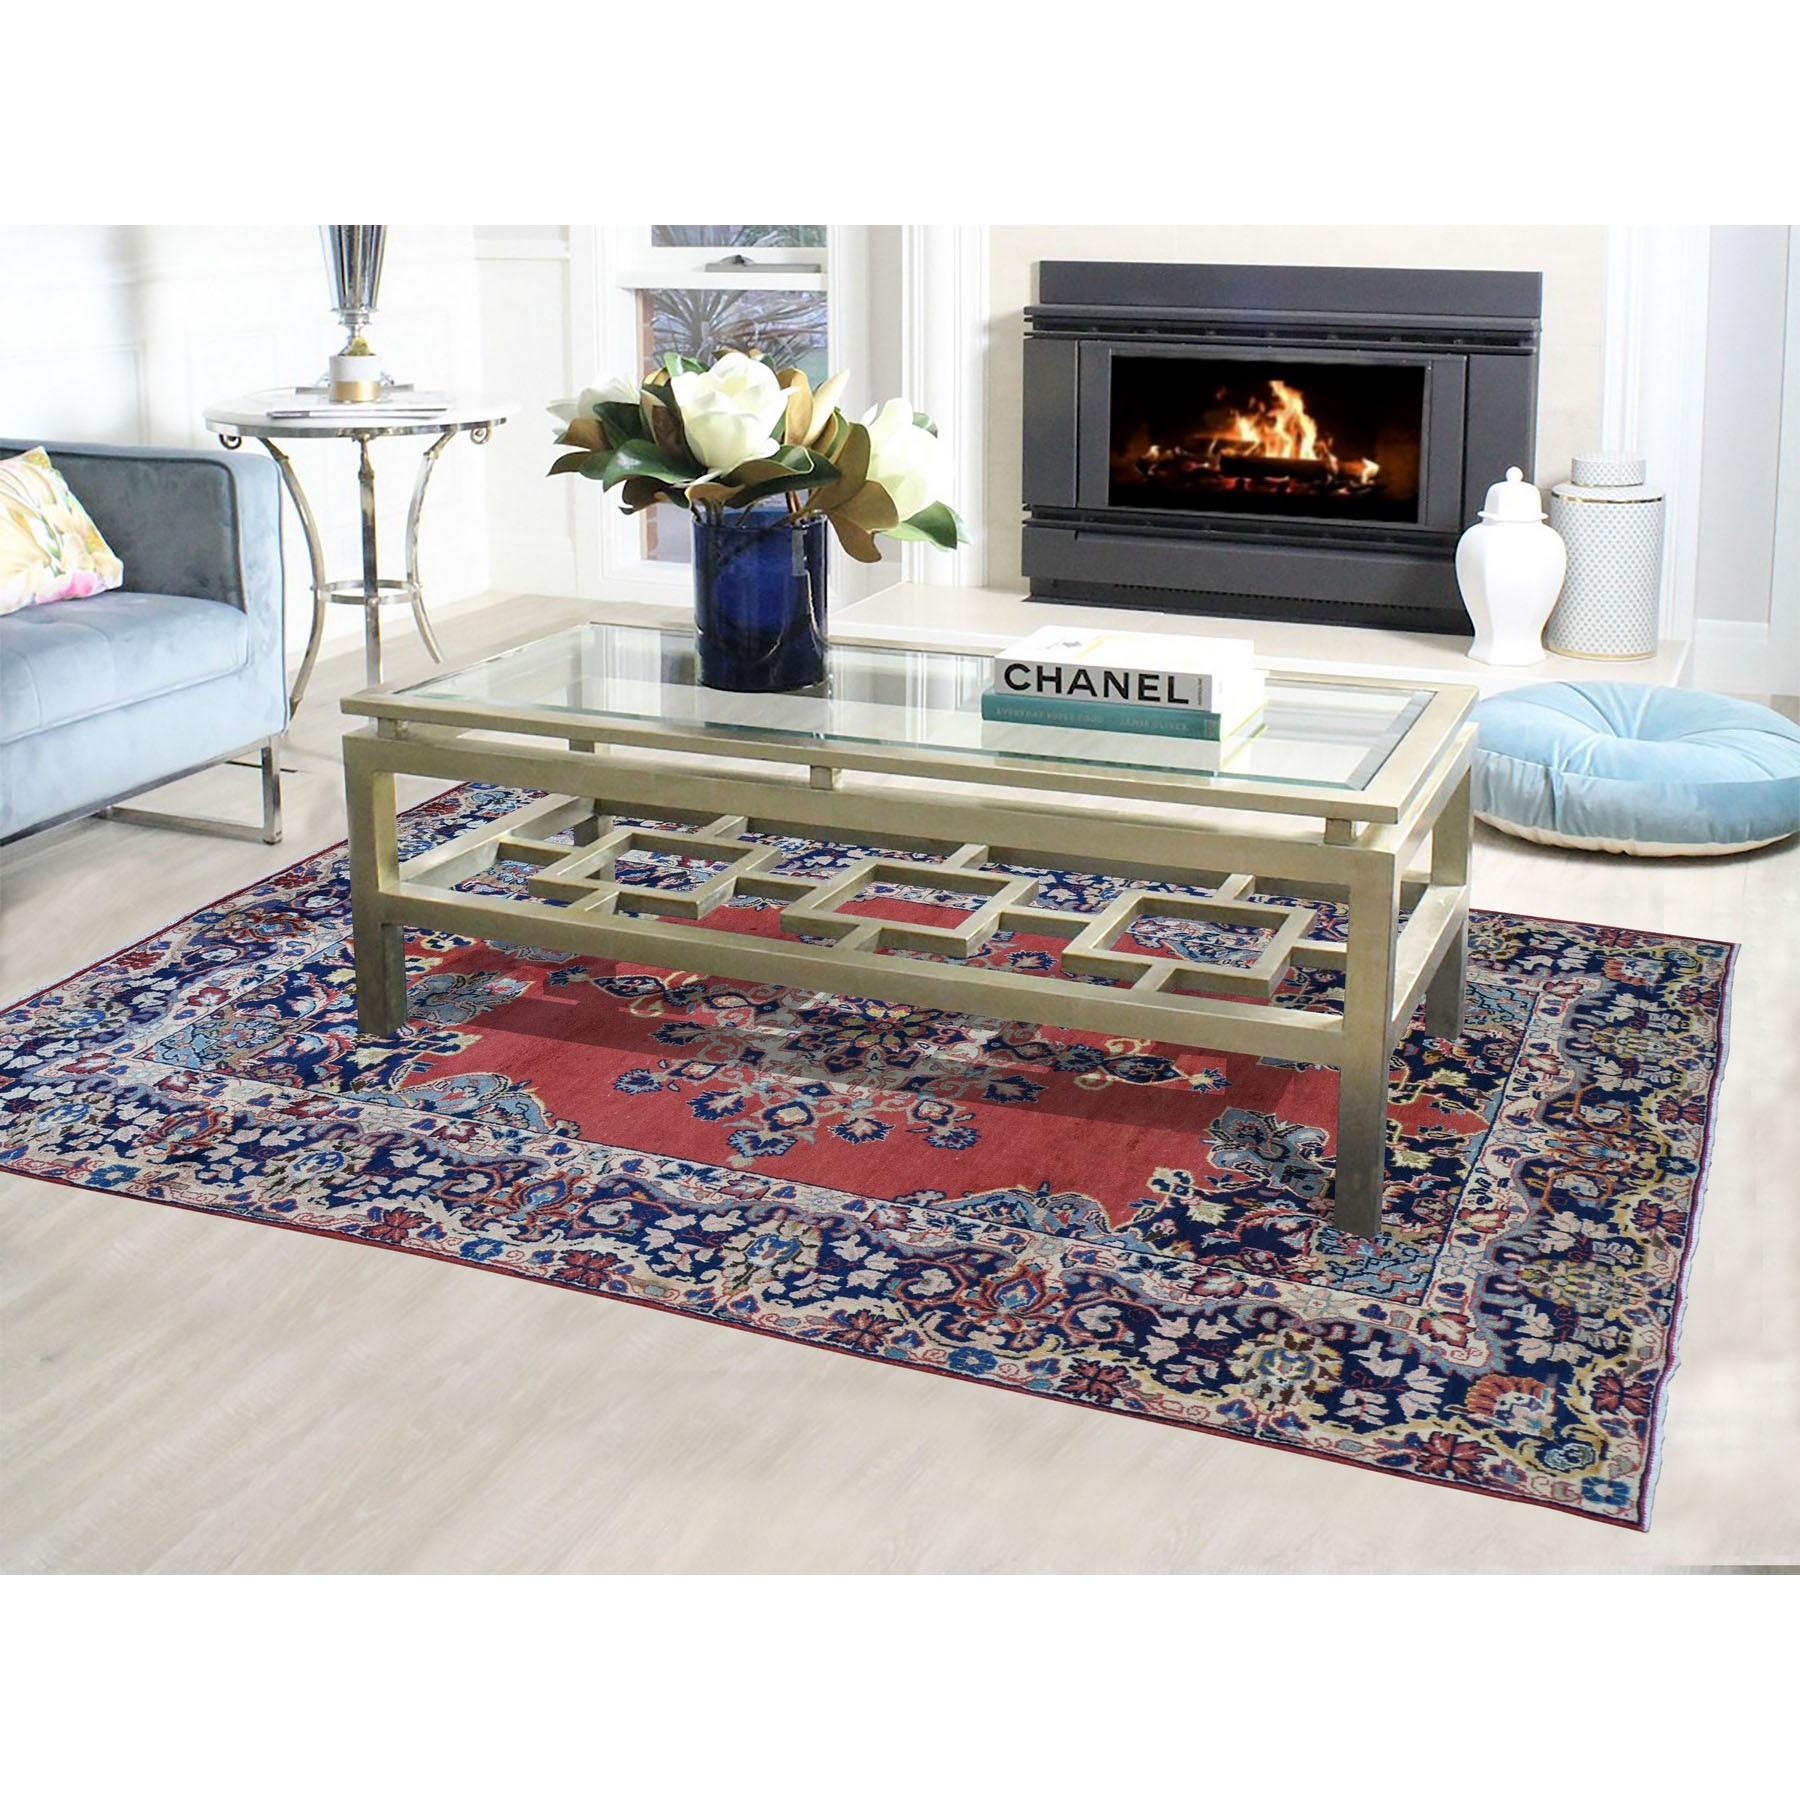 This is a truly genuine one-of-a-kind red vintage Persian Mahal open field pure wool hand knotted Oriental rug. It has been knotted for months and months in the centuries-old Persian weaving craftsmanship techniques by expert artisans. 

Primary